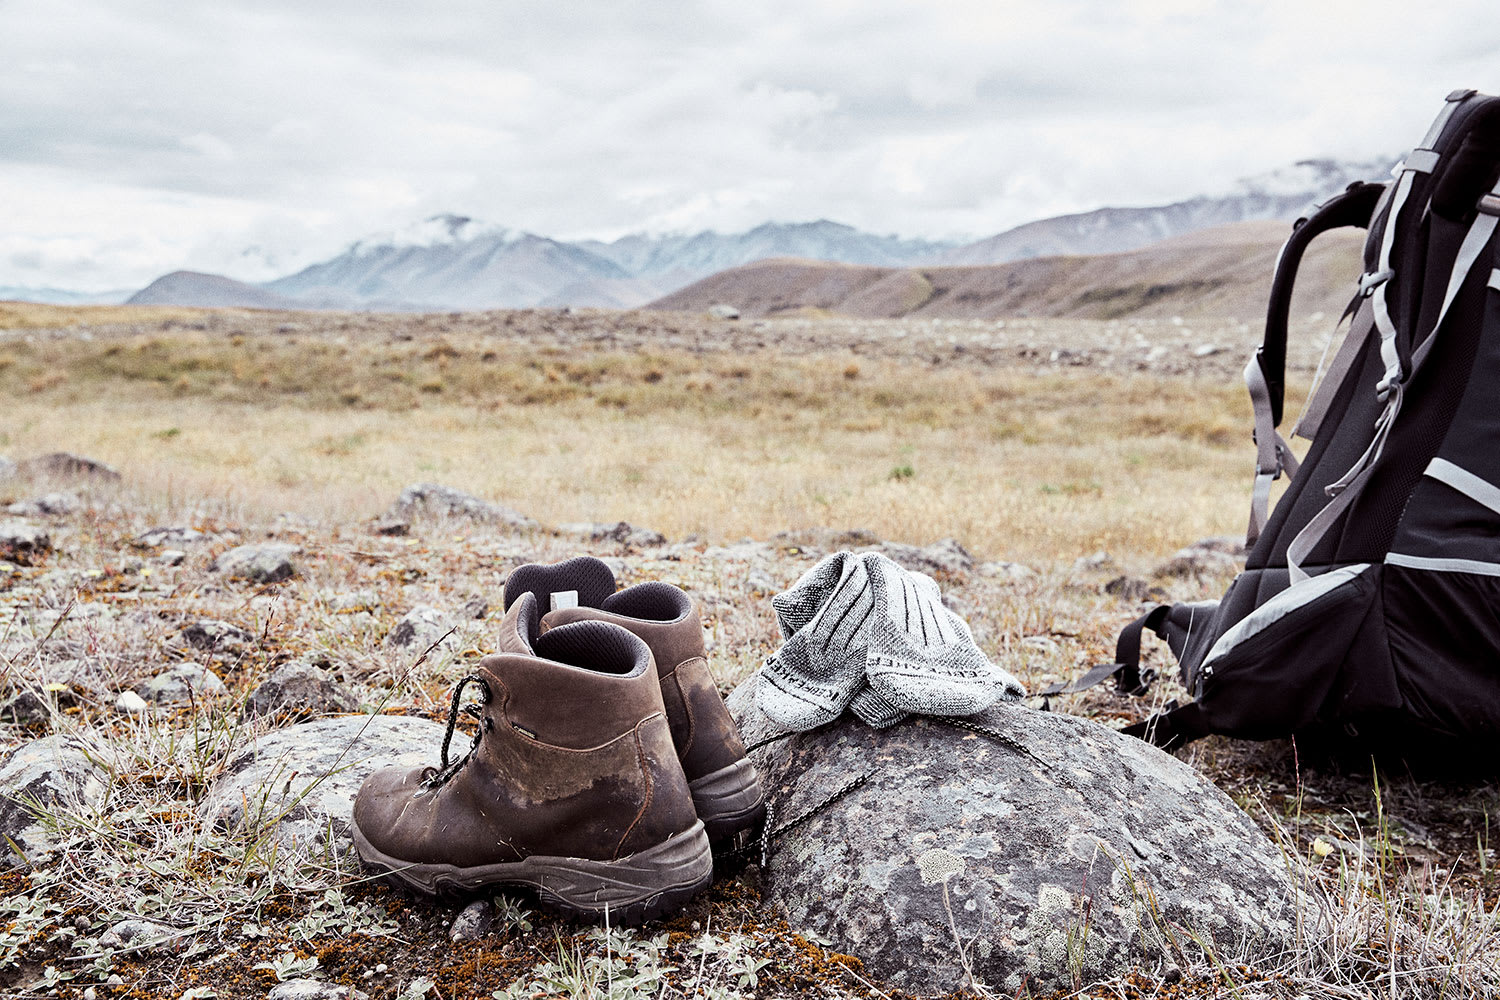 Hiking Boots airing out with mountain landscape in the background.